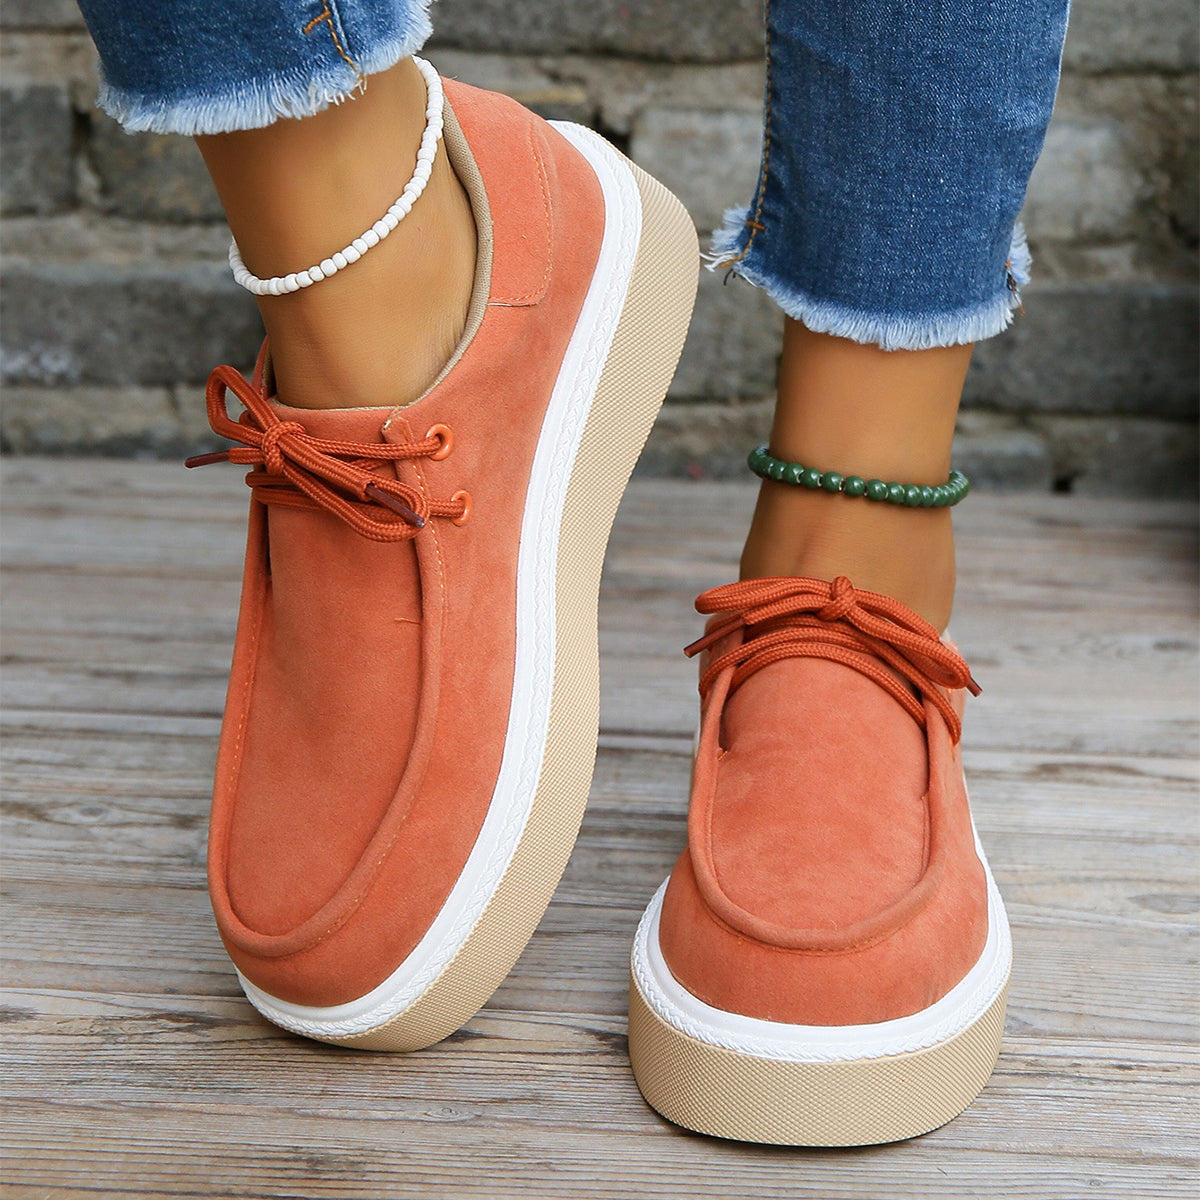 New Thick Bottom Lace-up Flats Women Solid Color Casual Fashion Lightweight